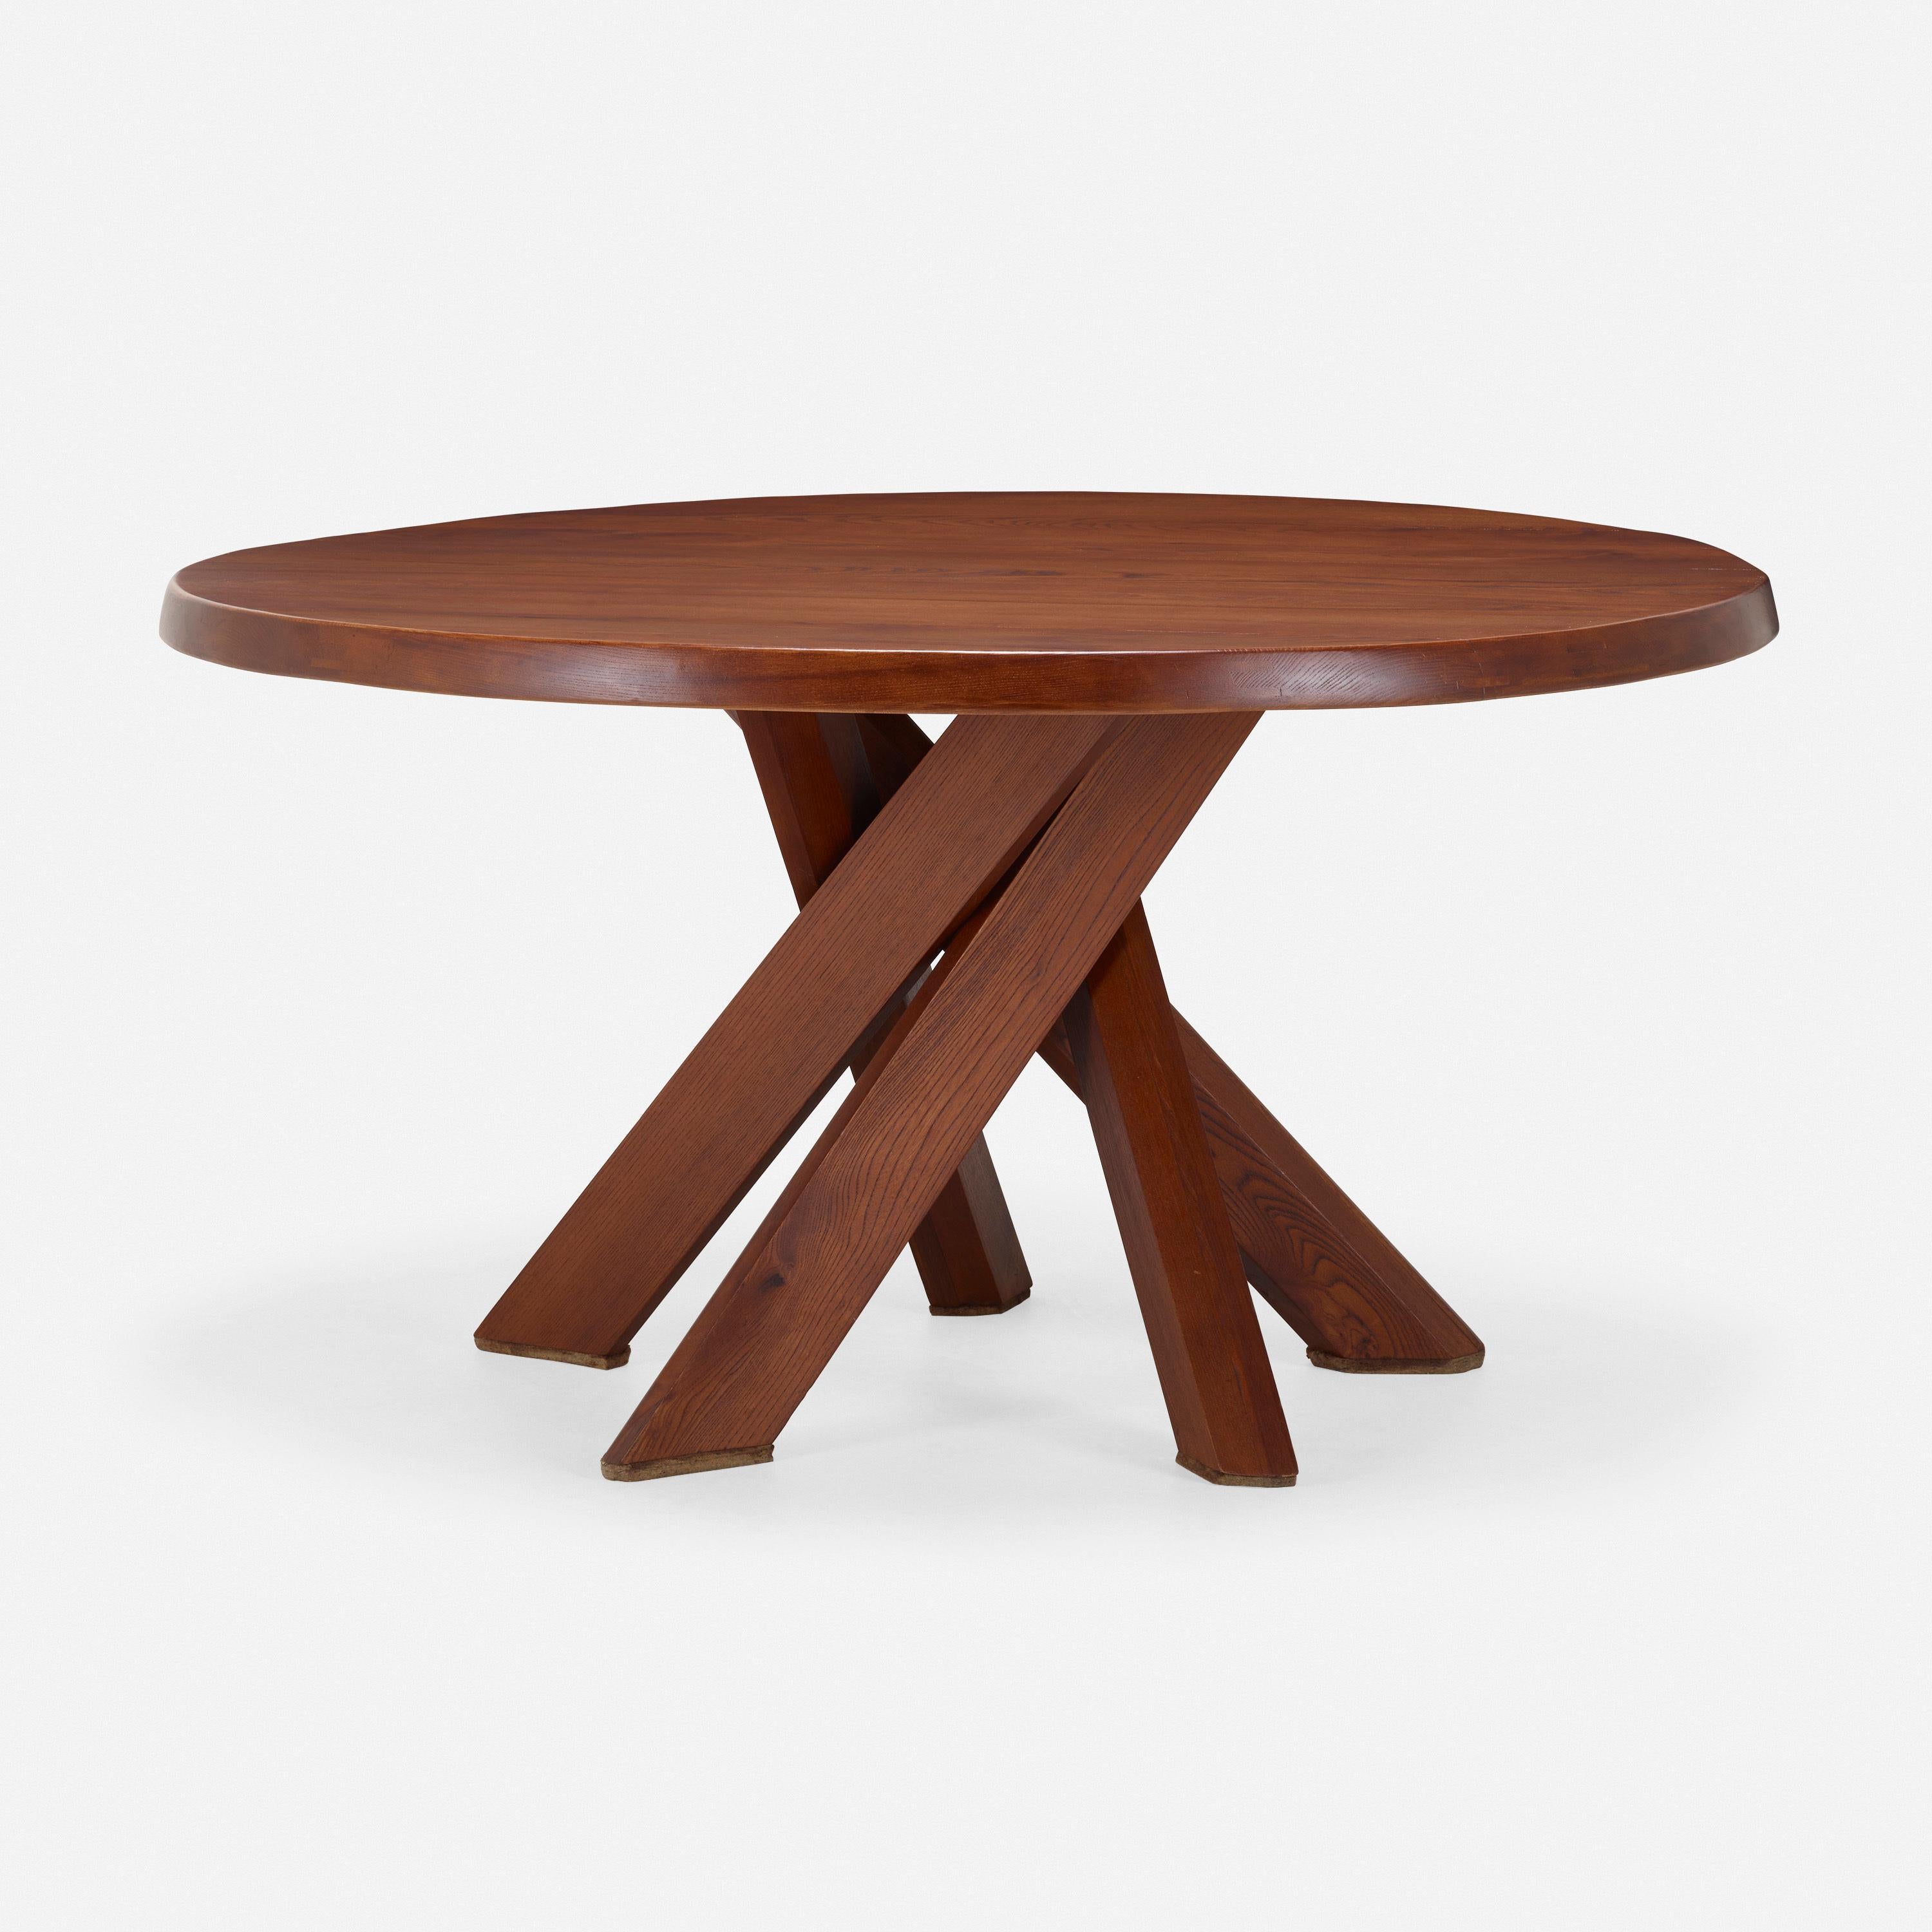 Elmwood circular dining Table model T21D by Pierre Chapo.
After the war, he passed the entrance exam to the Beaux Arts de Paris in architecture. The classics, Greeks, Romans, the Bauhaus masters, Frank Lloyd Wright, Buckminster Fuller, Le